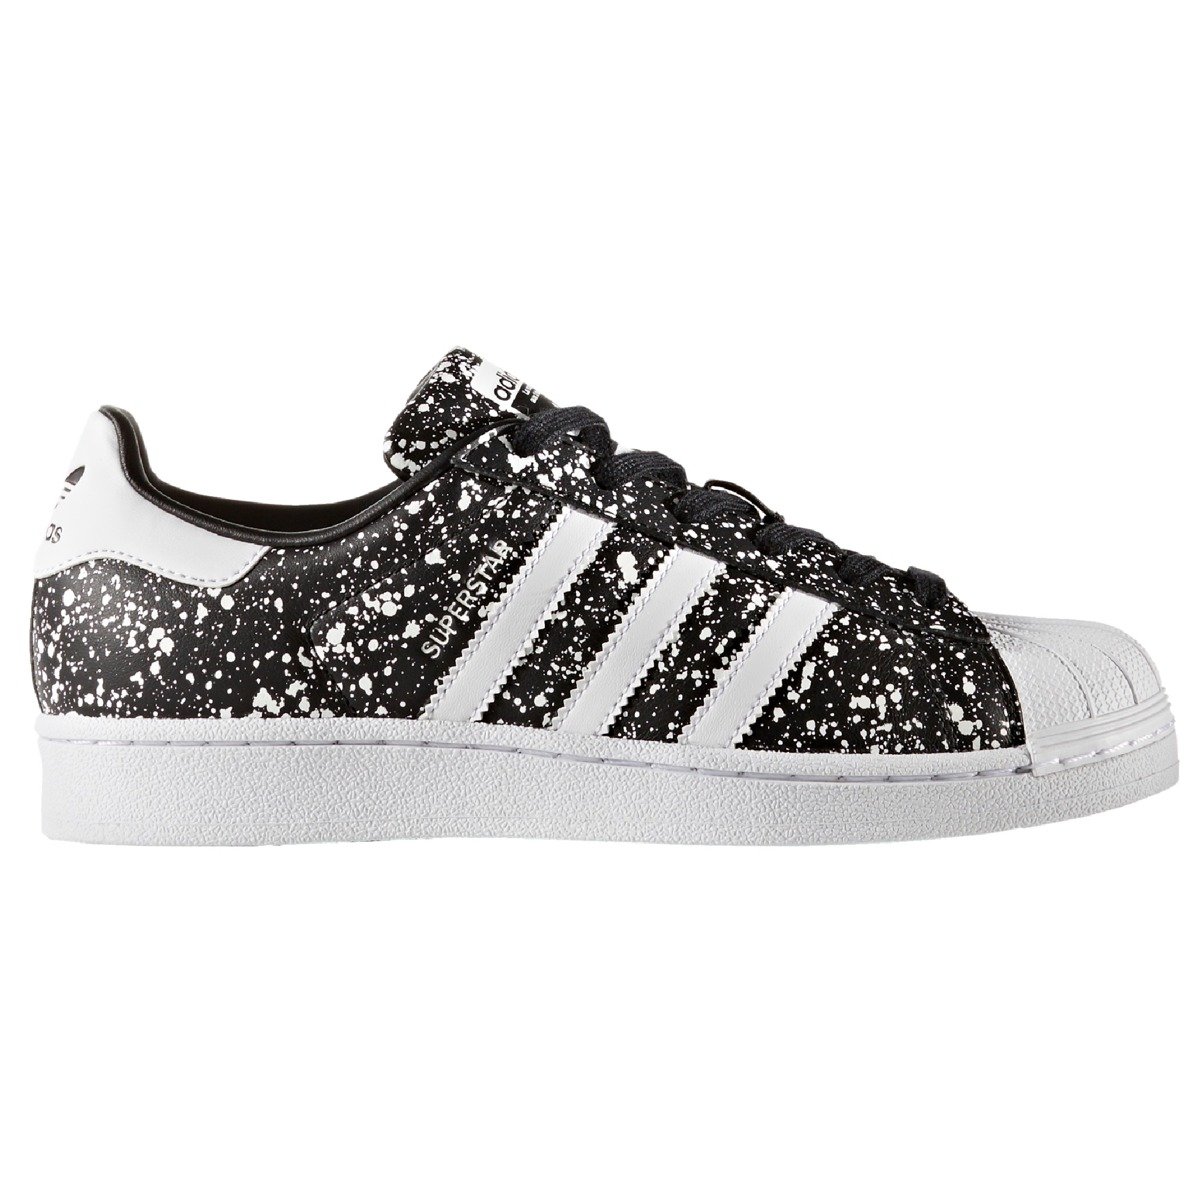 Adidas Superstar Women - BY9172 | Basketball Shoes \ Casual Shoes ...